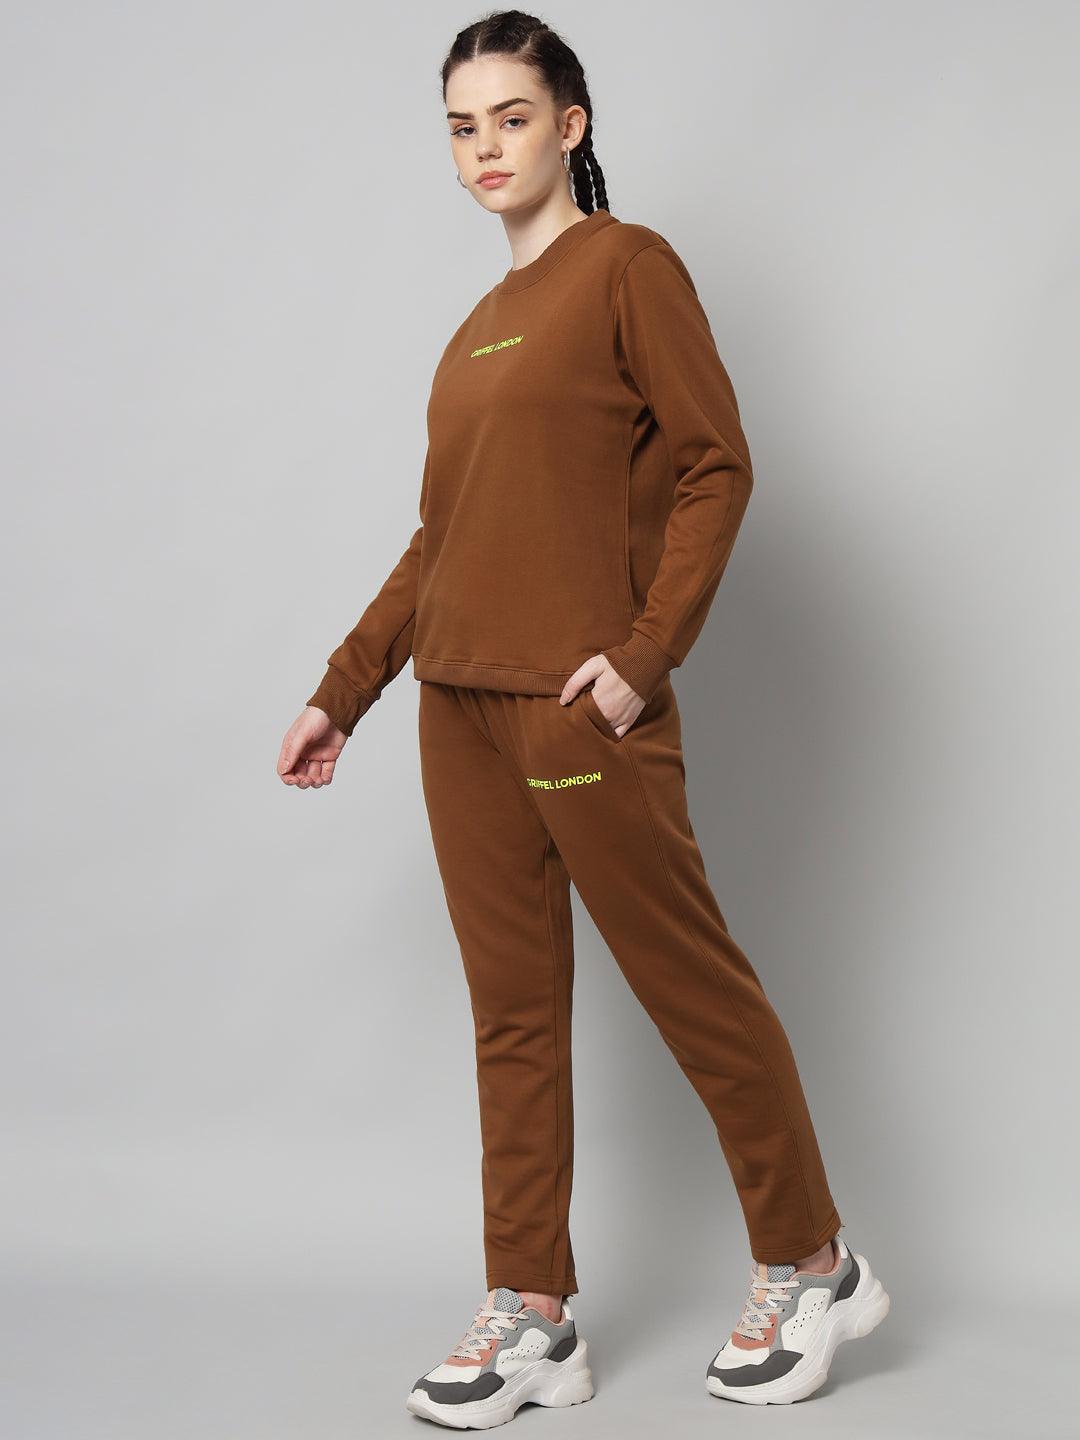 Griffel Women Solid Fleece Basic Round Neck Sweatshirt and Joggers Full set Coffee Tracksuit - griffel